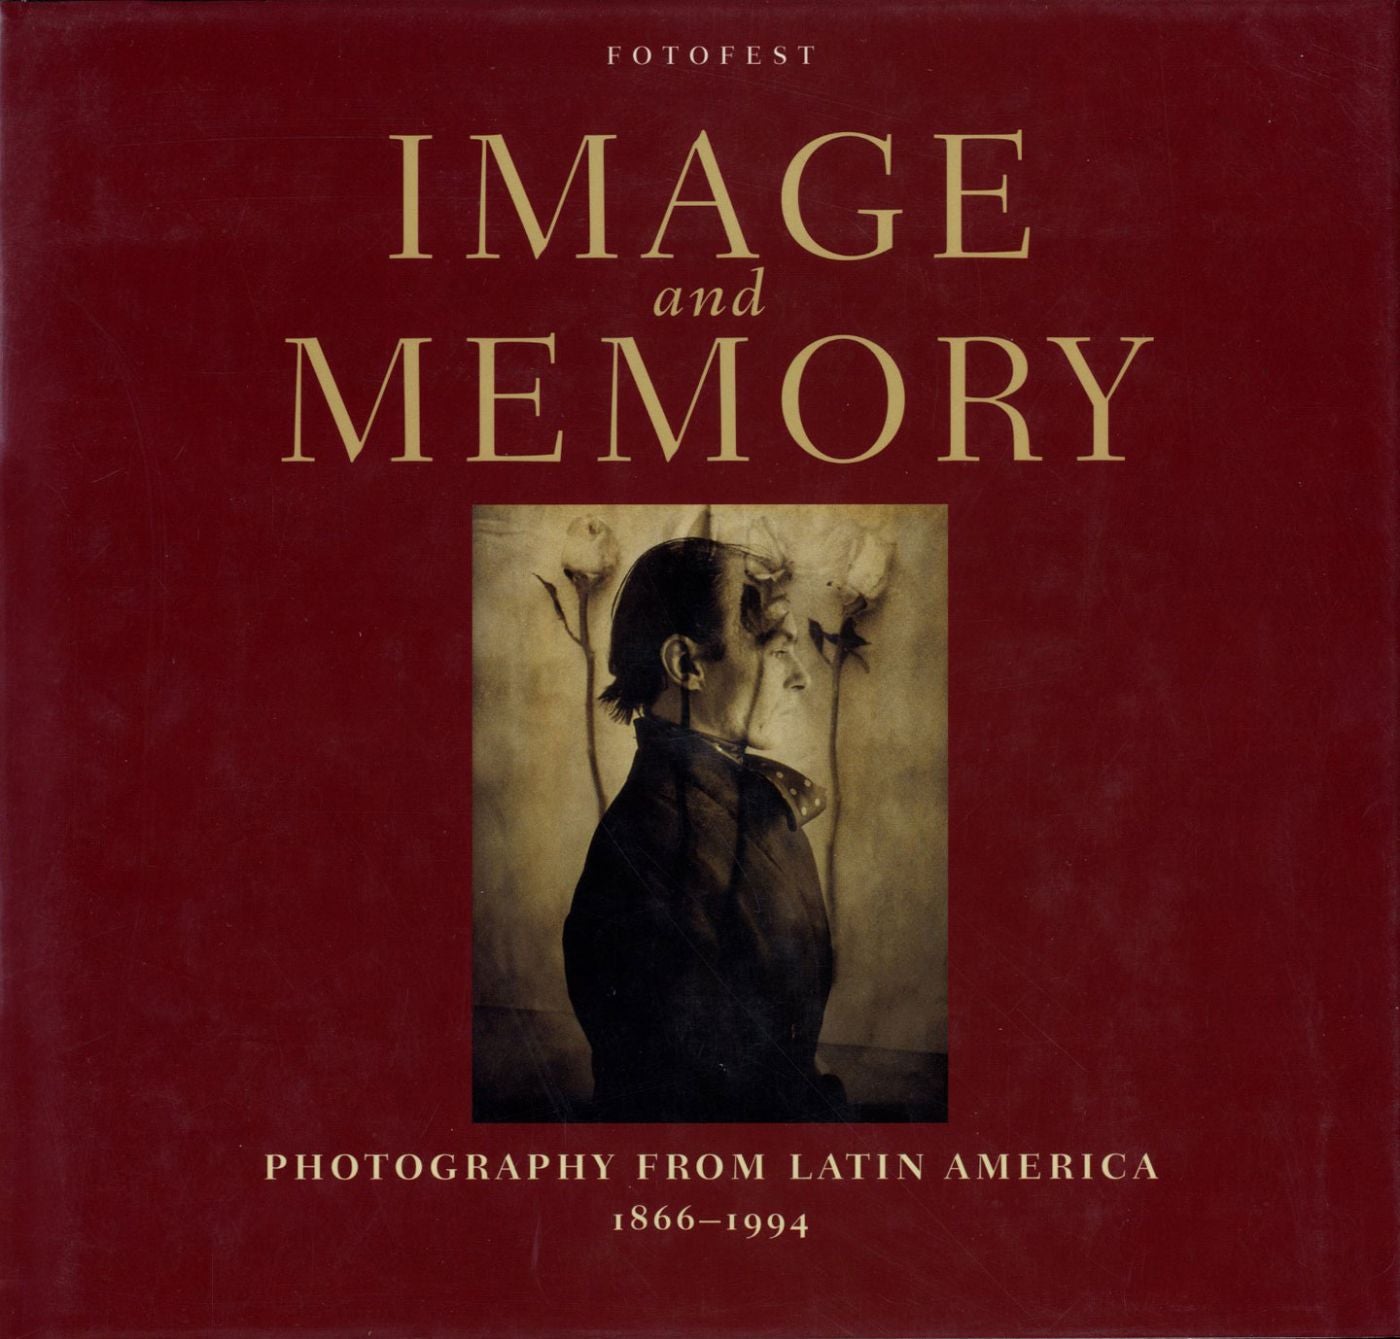 Image and Memory: Photography from Latin America 1866-1994